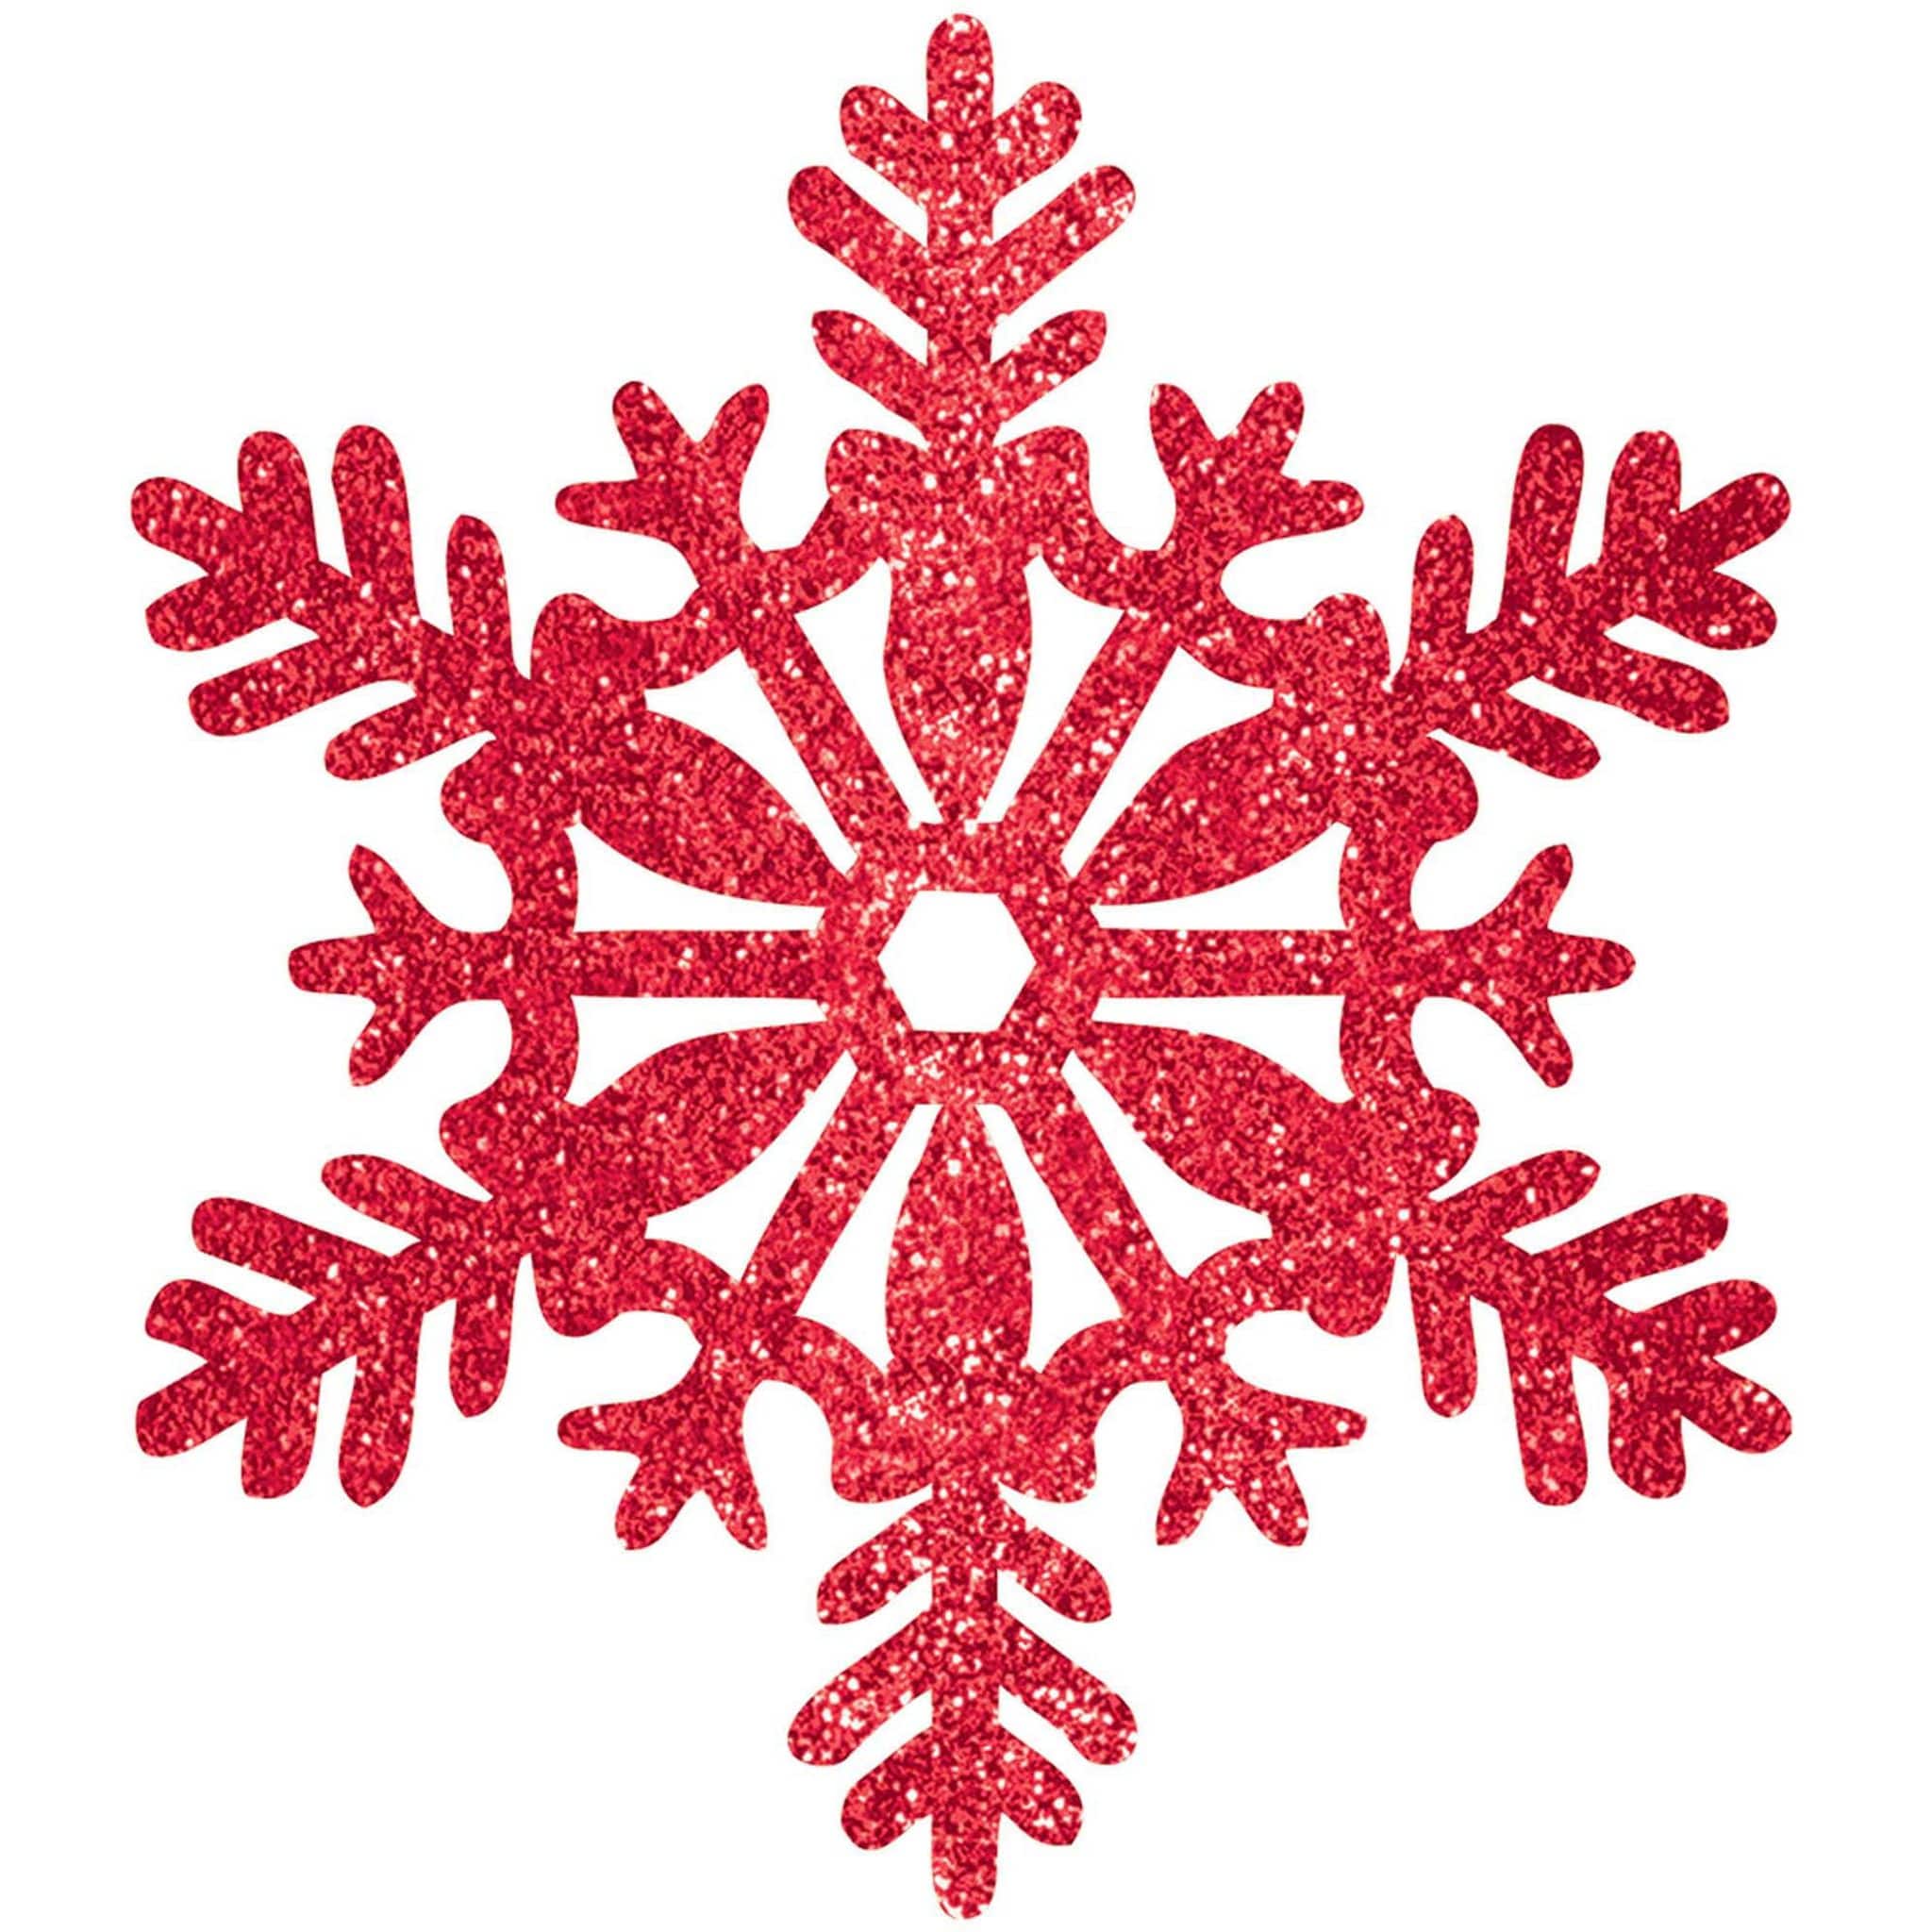 Three Red Glitter Snowflakes Stock Image - Image of snow, glitter: 17142759